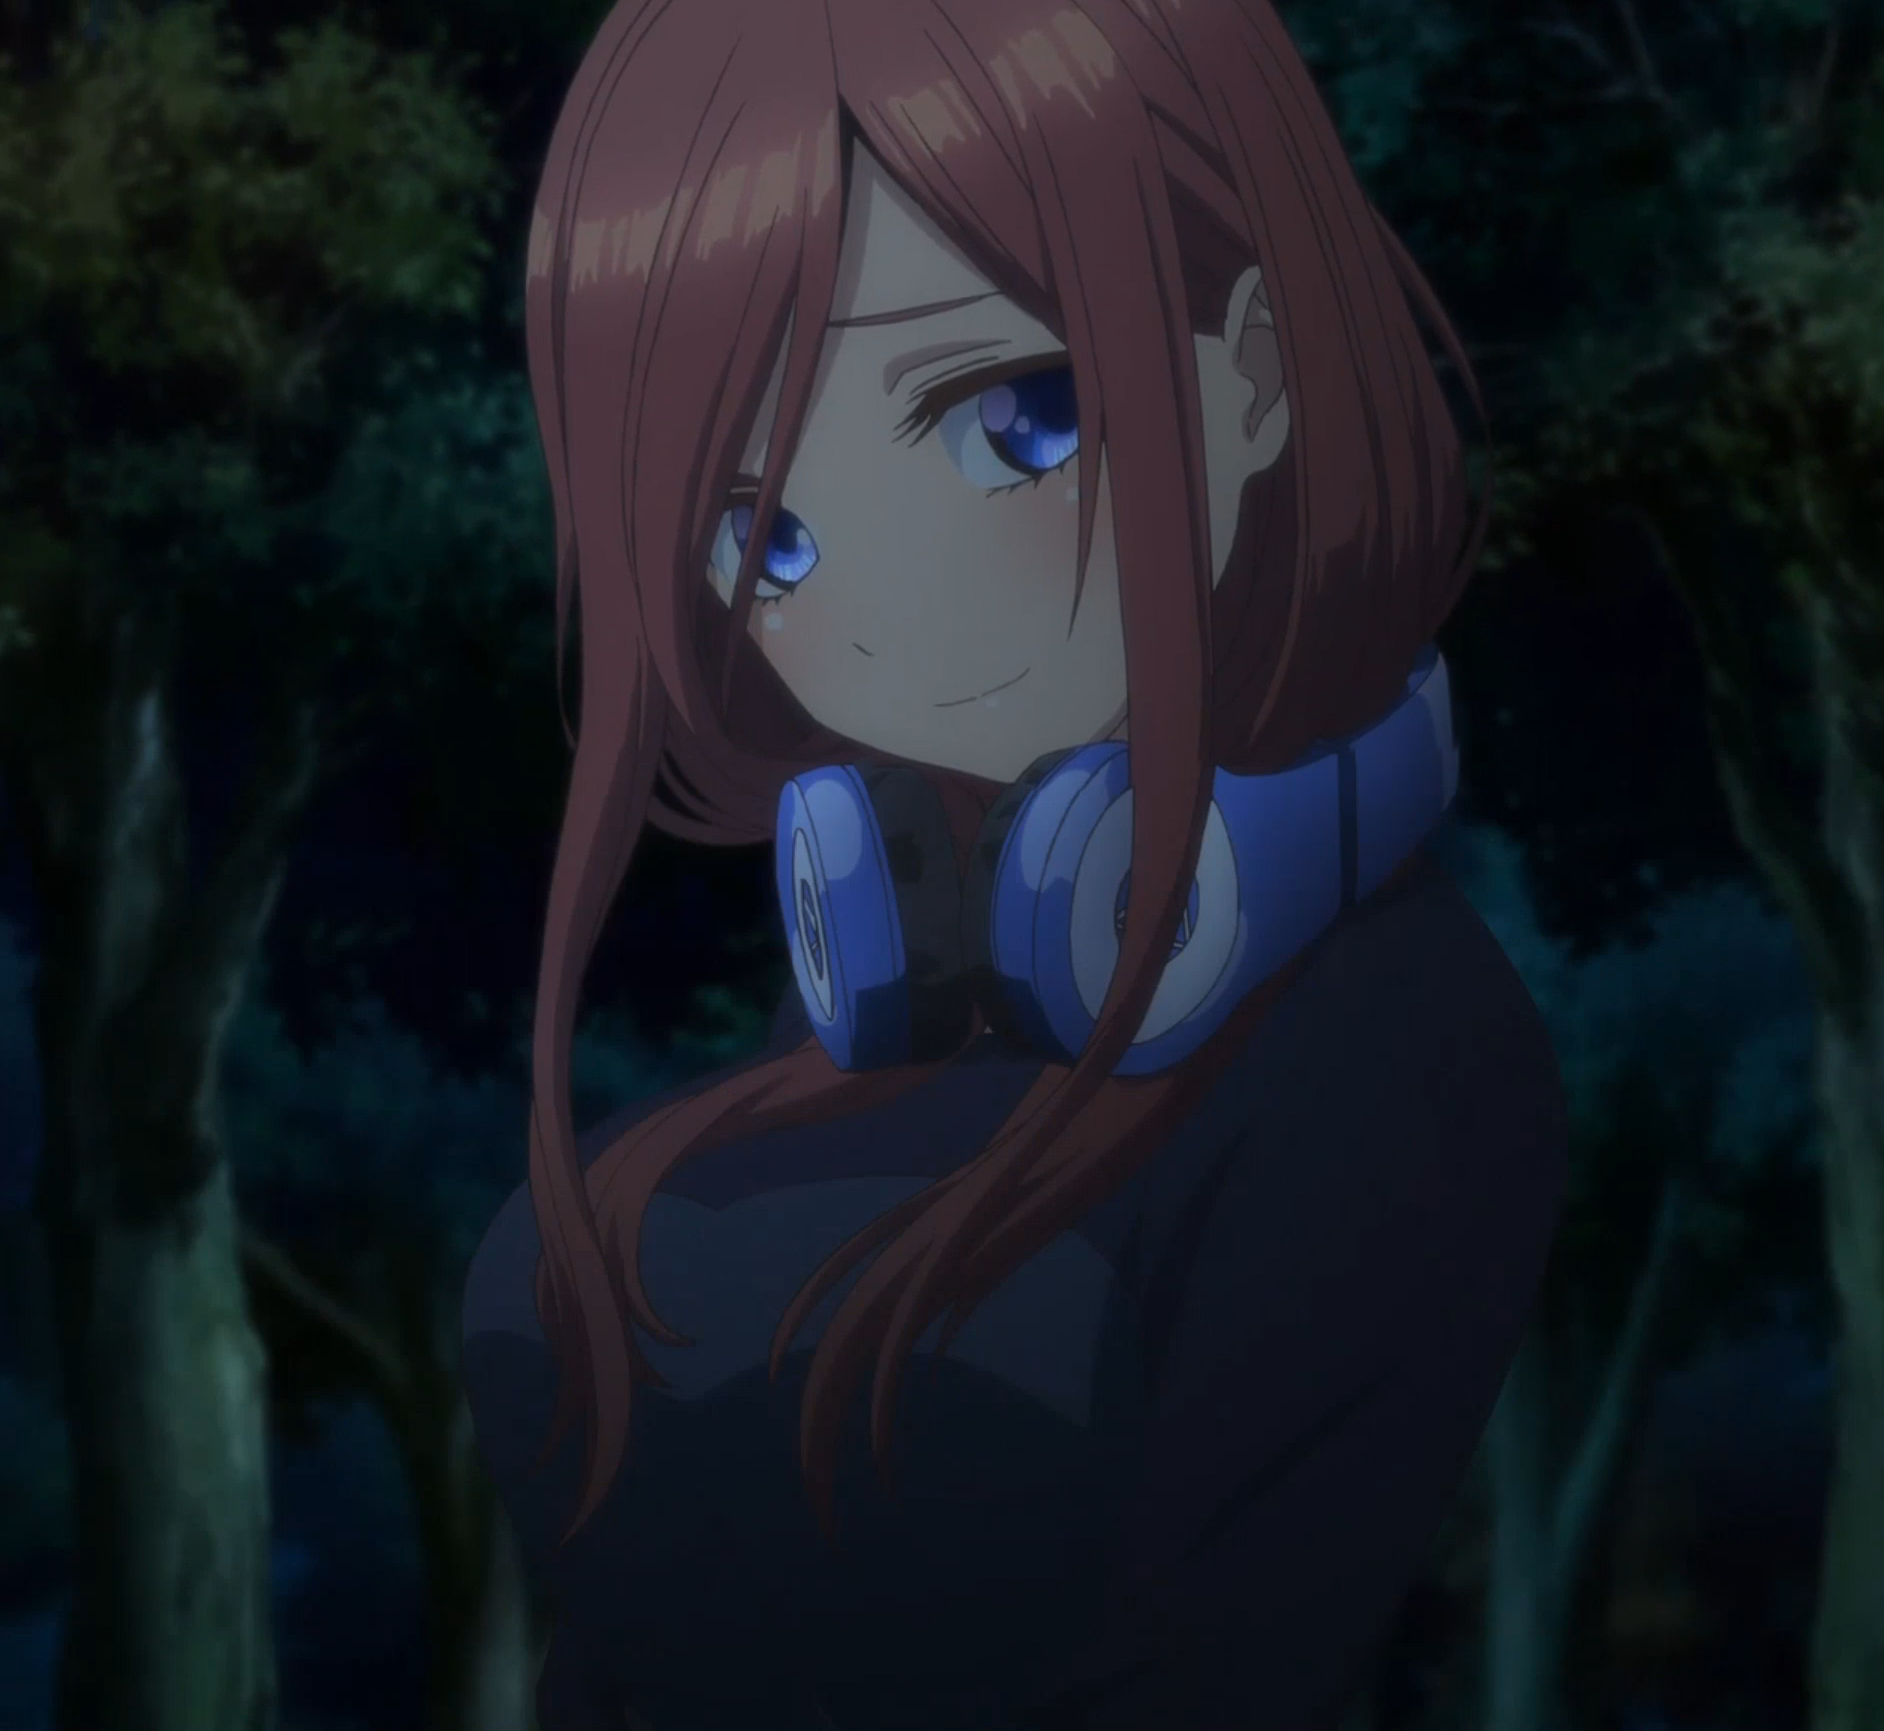 Catching All the Skipped Content from Episode 10 of Go-toubun no Hanayome ∬